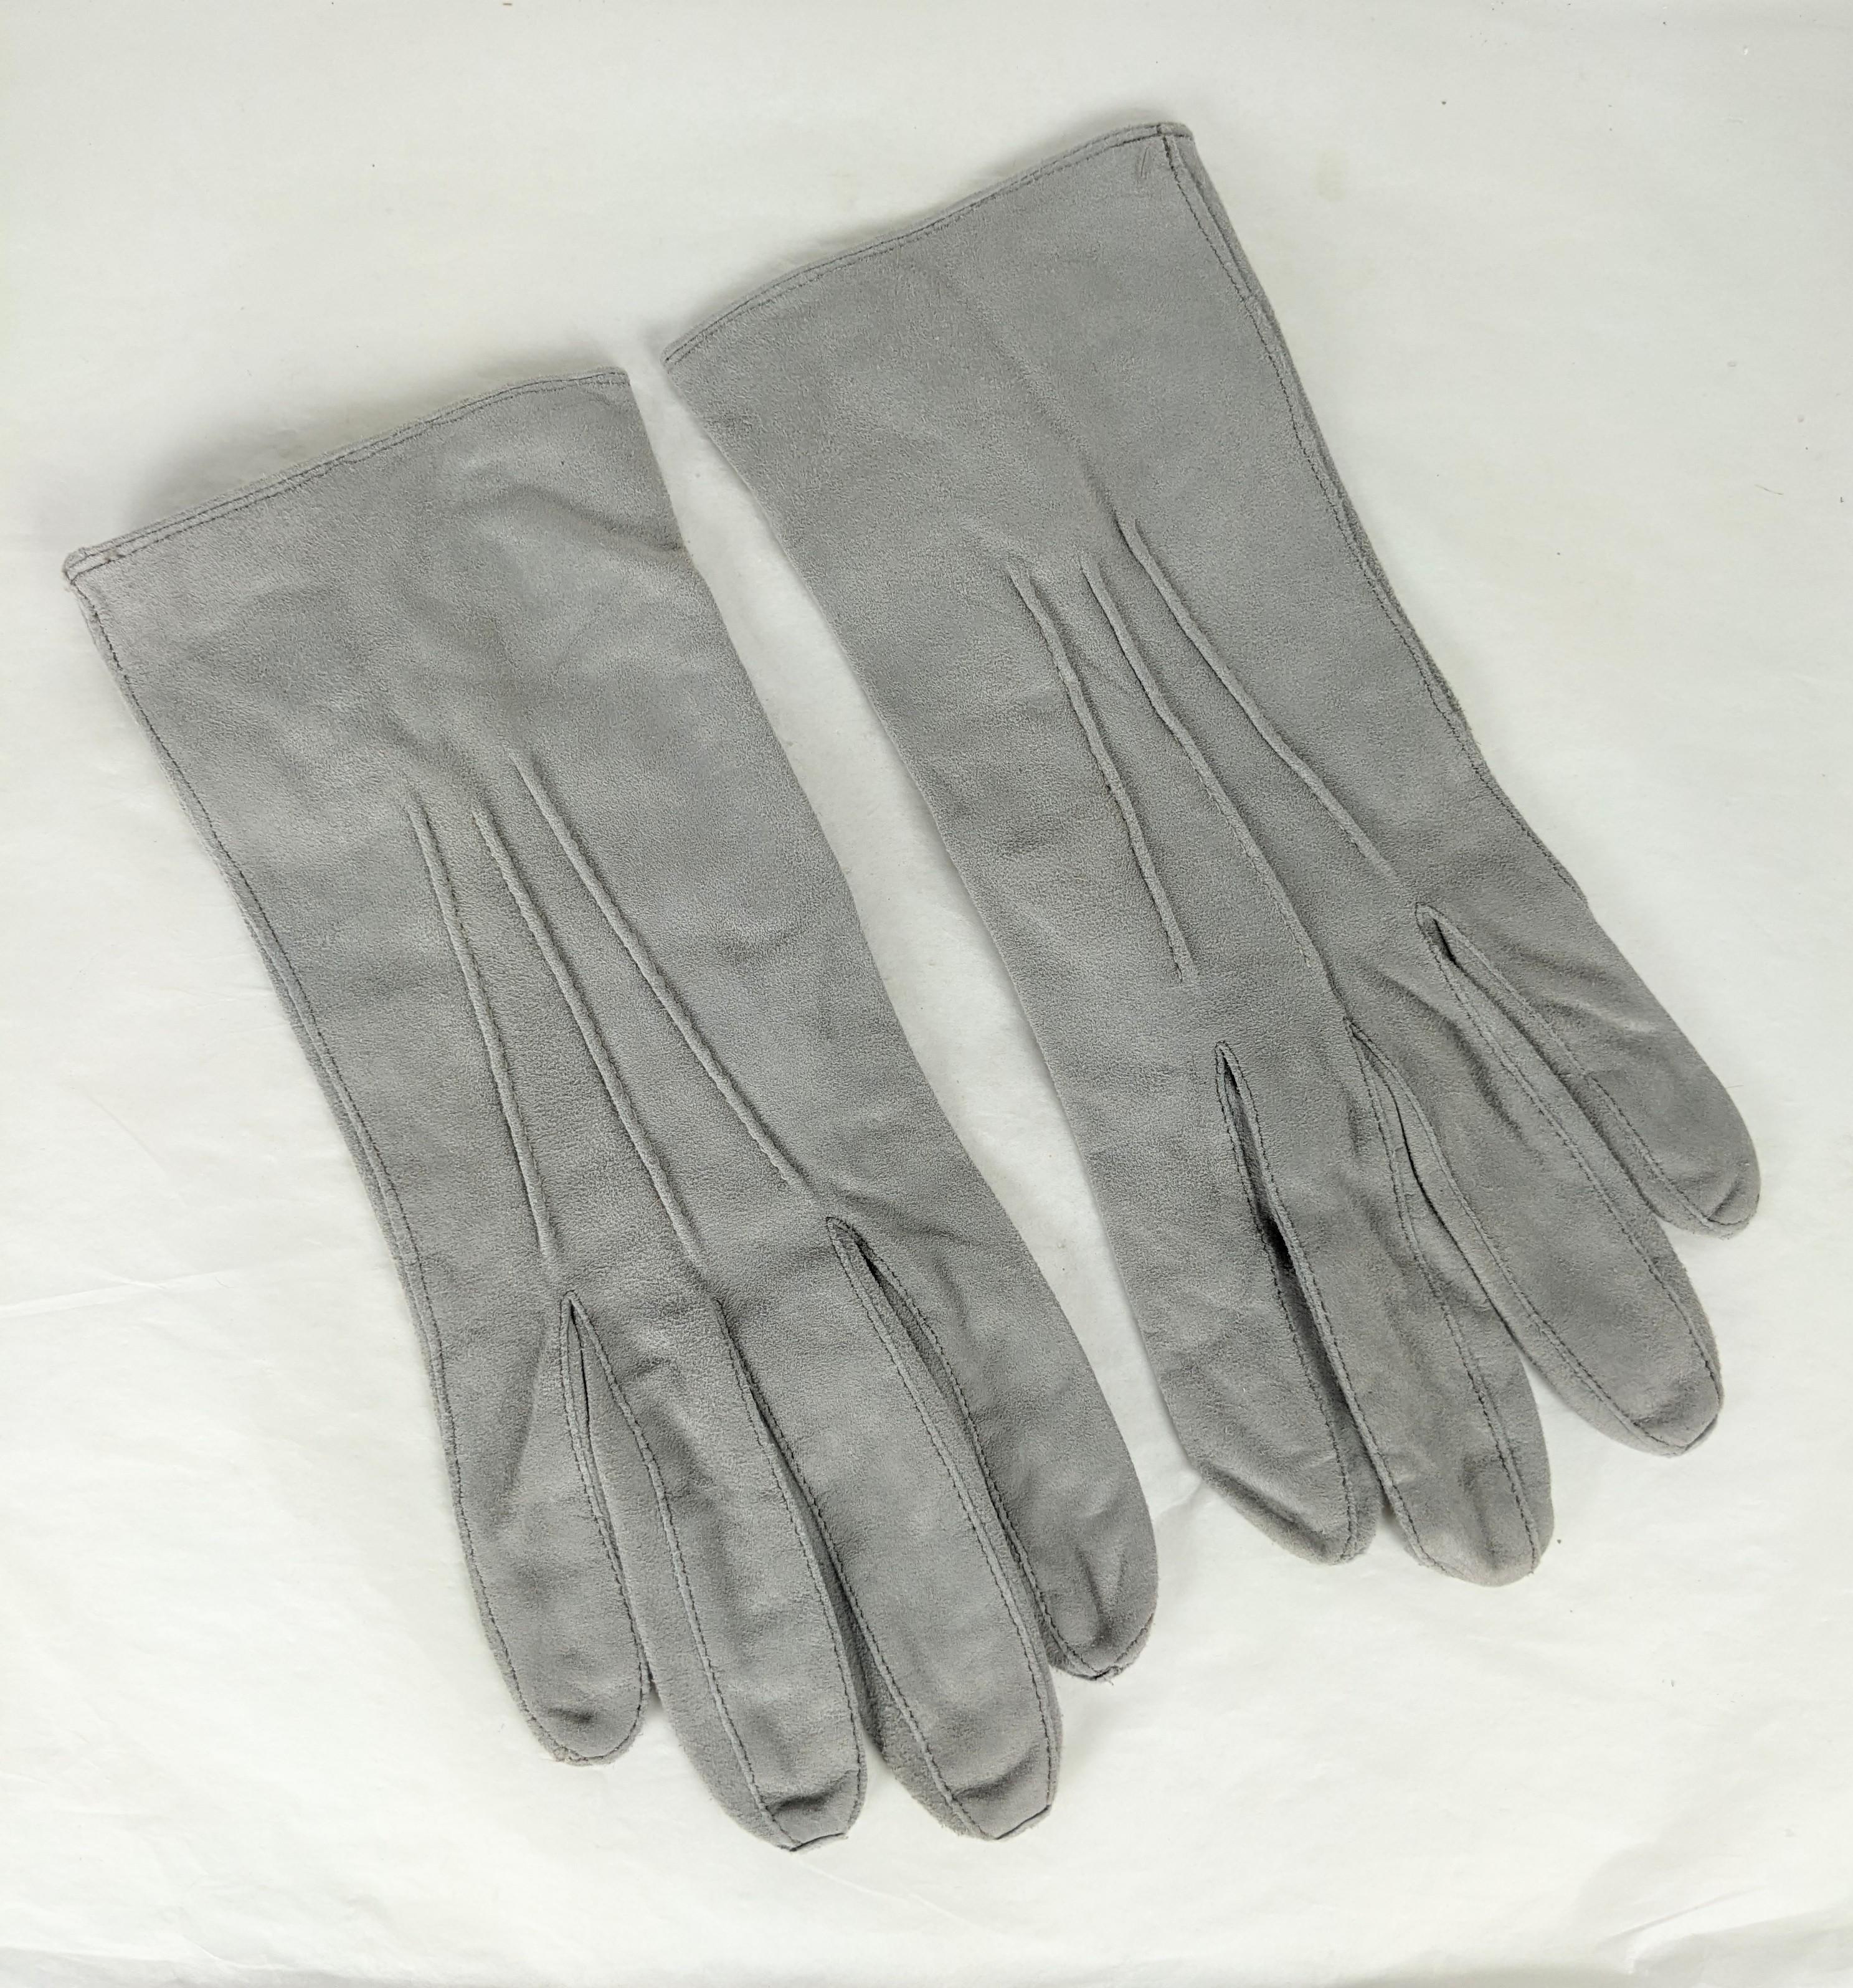 Vintage Brooks Brothers Mens Dove Gray Suede Dress Gloves from the 1940's. Taille 8.5 Mens buttery soft suede. Fermeture à bouton-pression au dos. États-Unis, années 1940. 